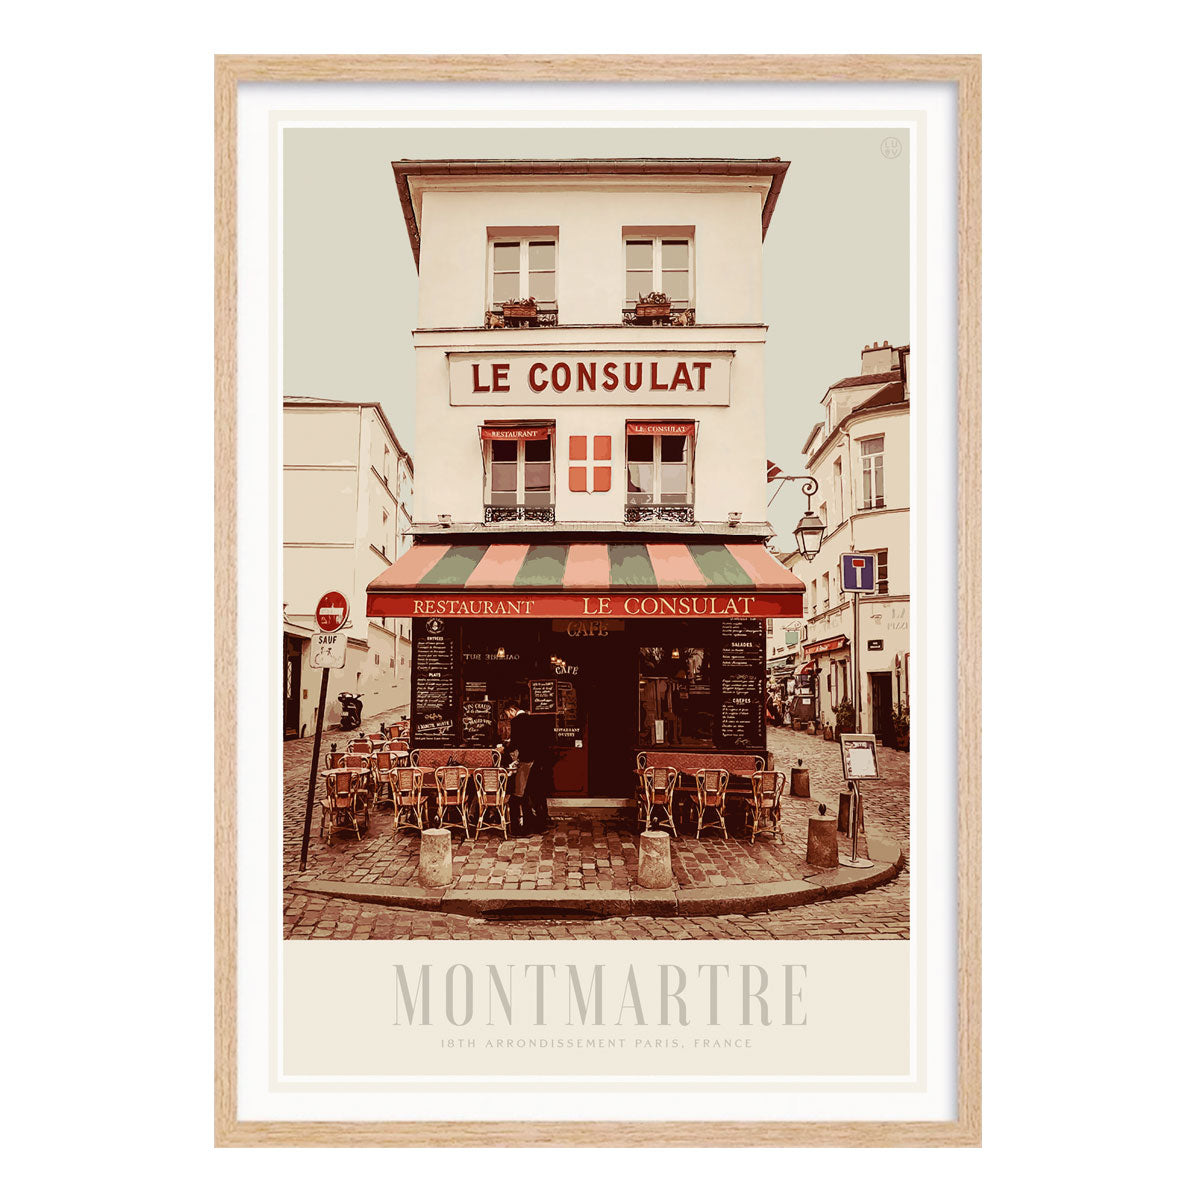 Le Consulat Cafe Paris retro vintage poster print in oak frame from Places We Luv